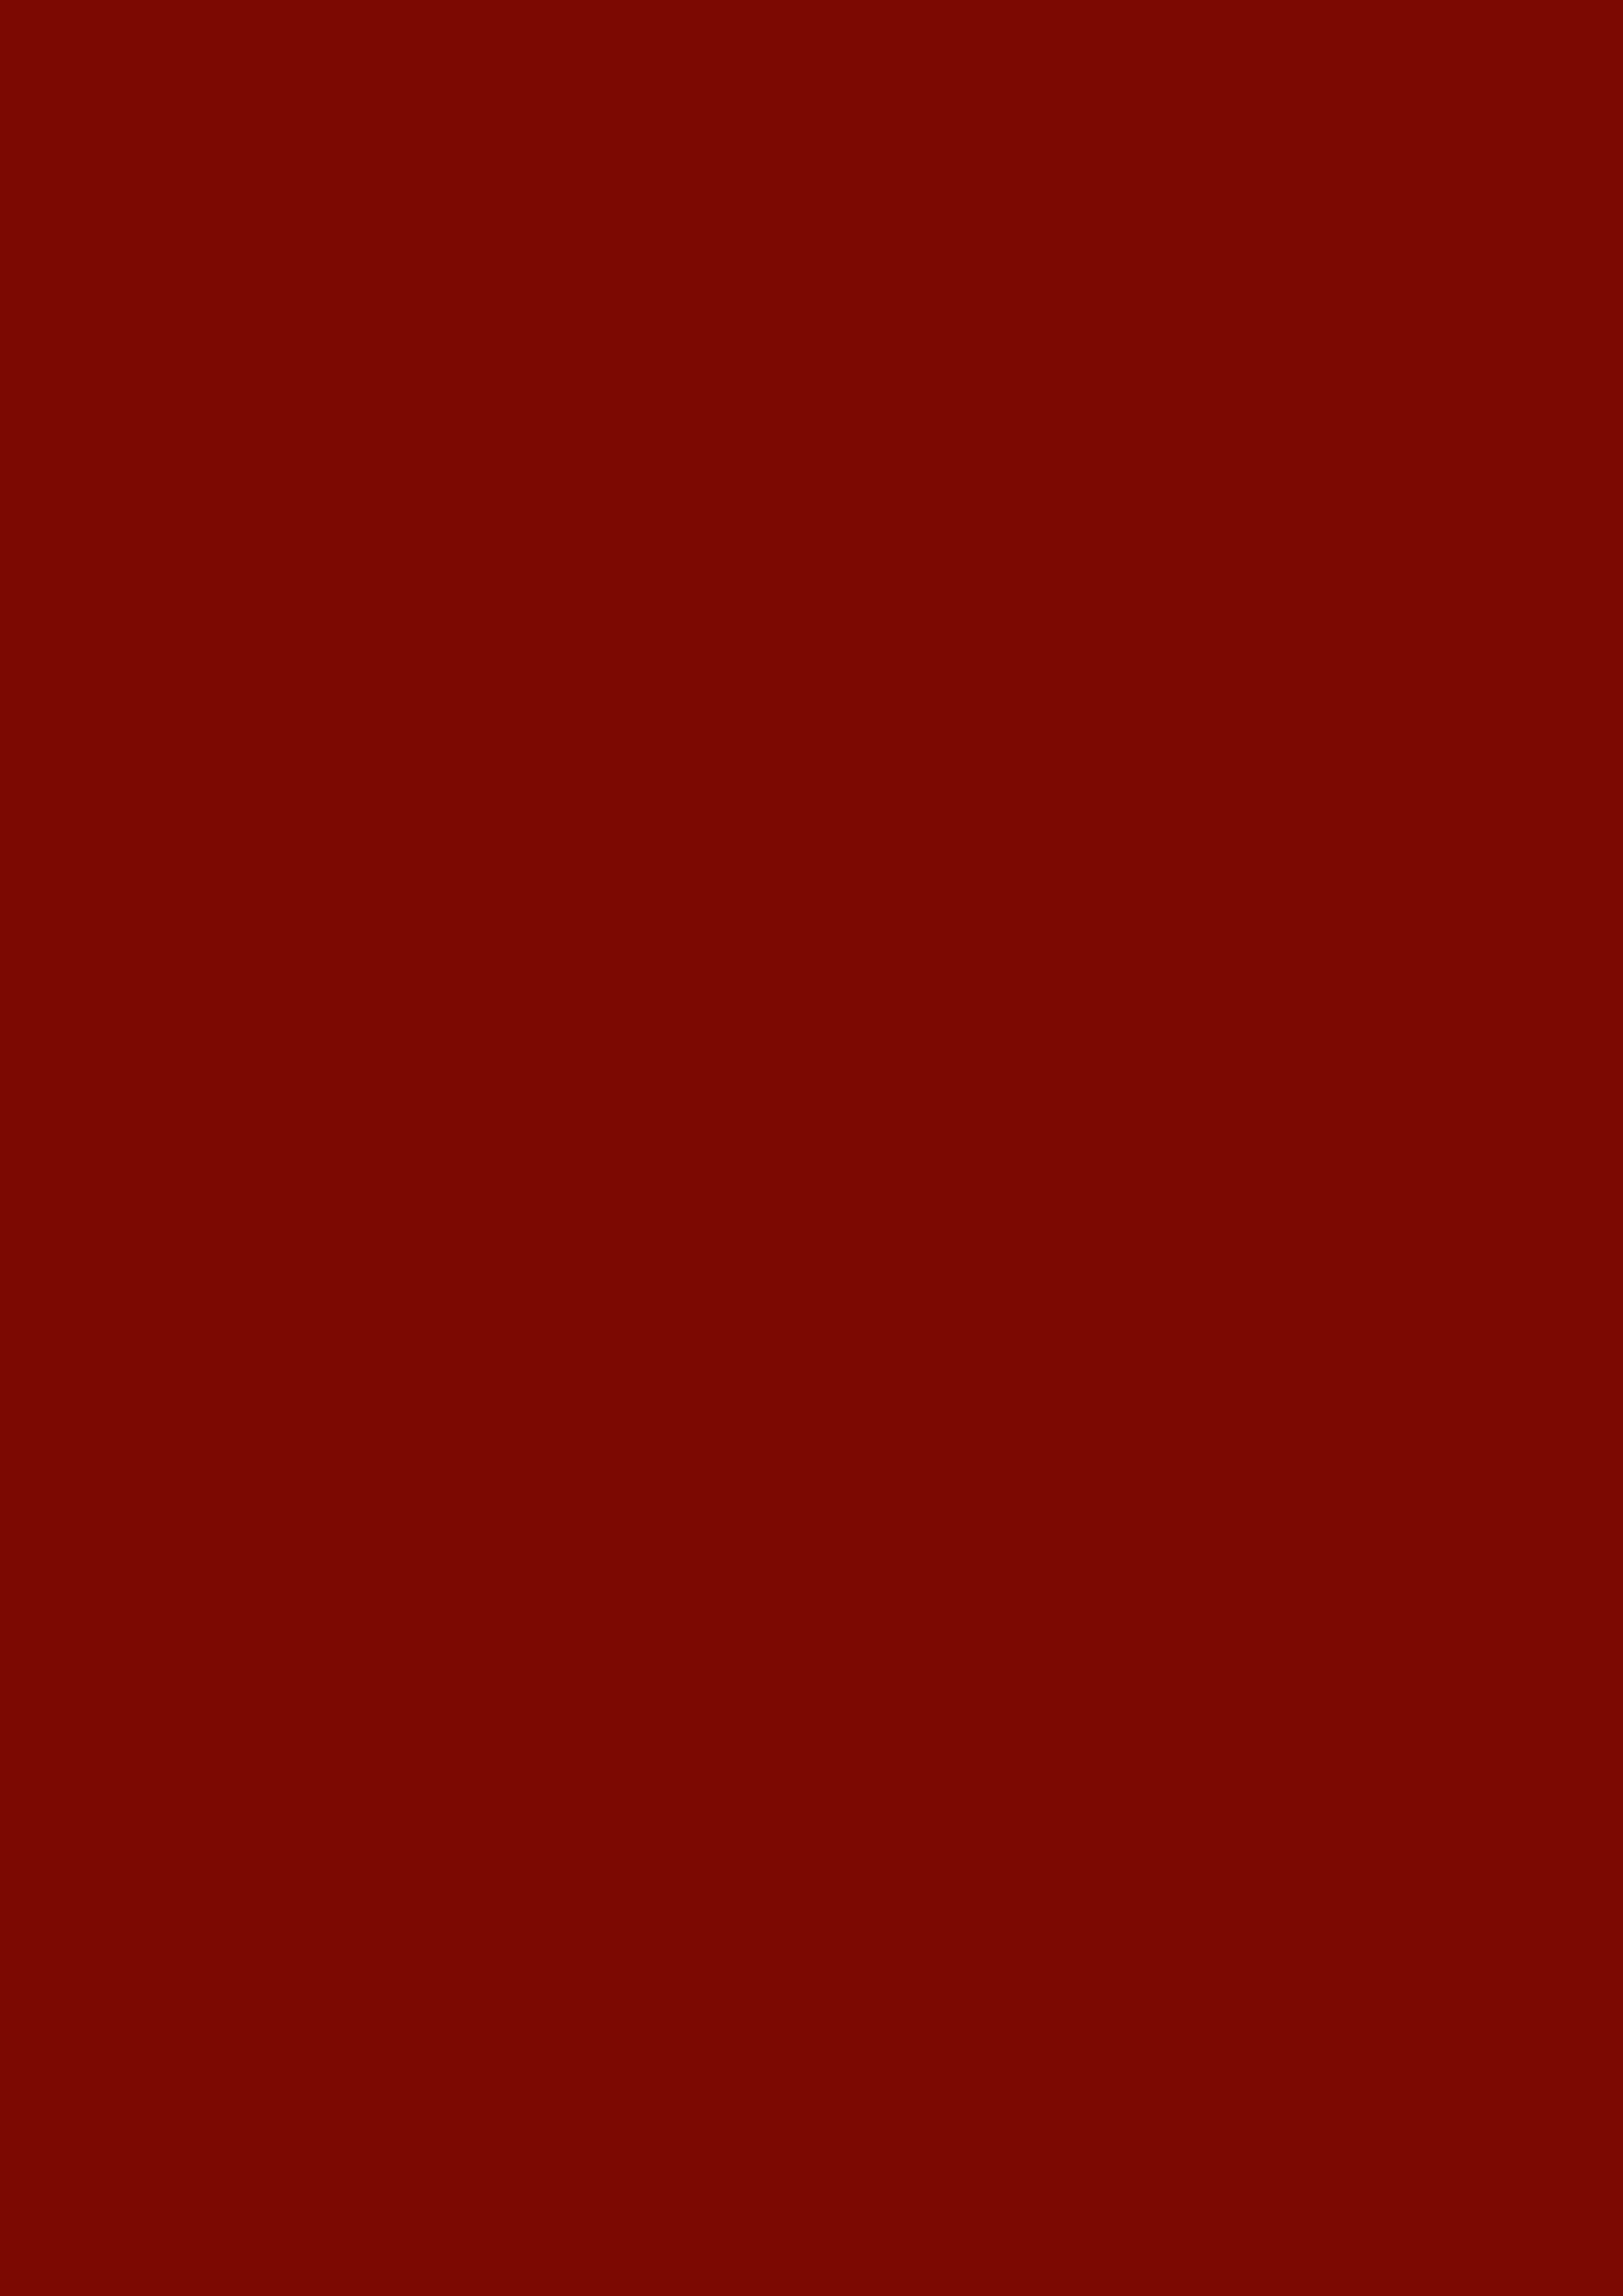 2480x3508 Barn Red Solid Color Background